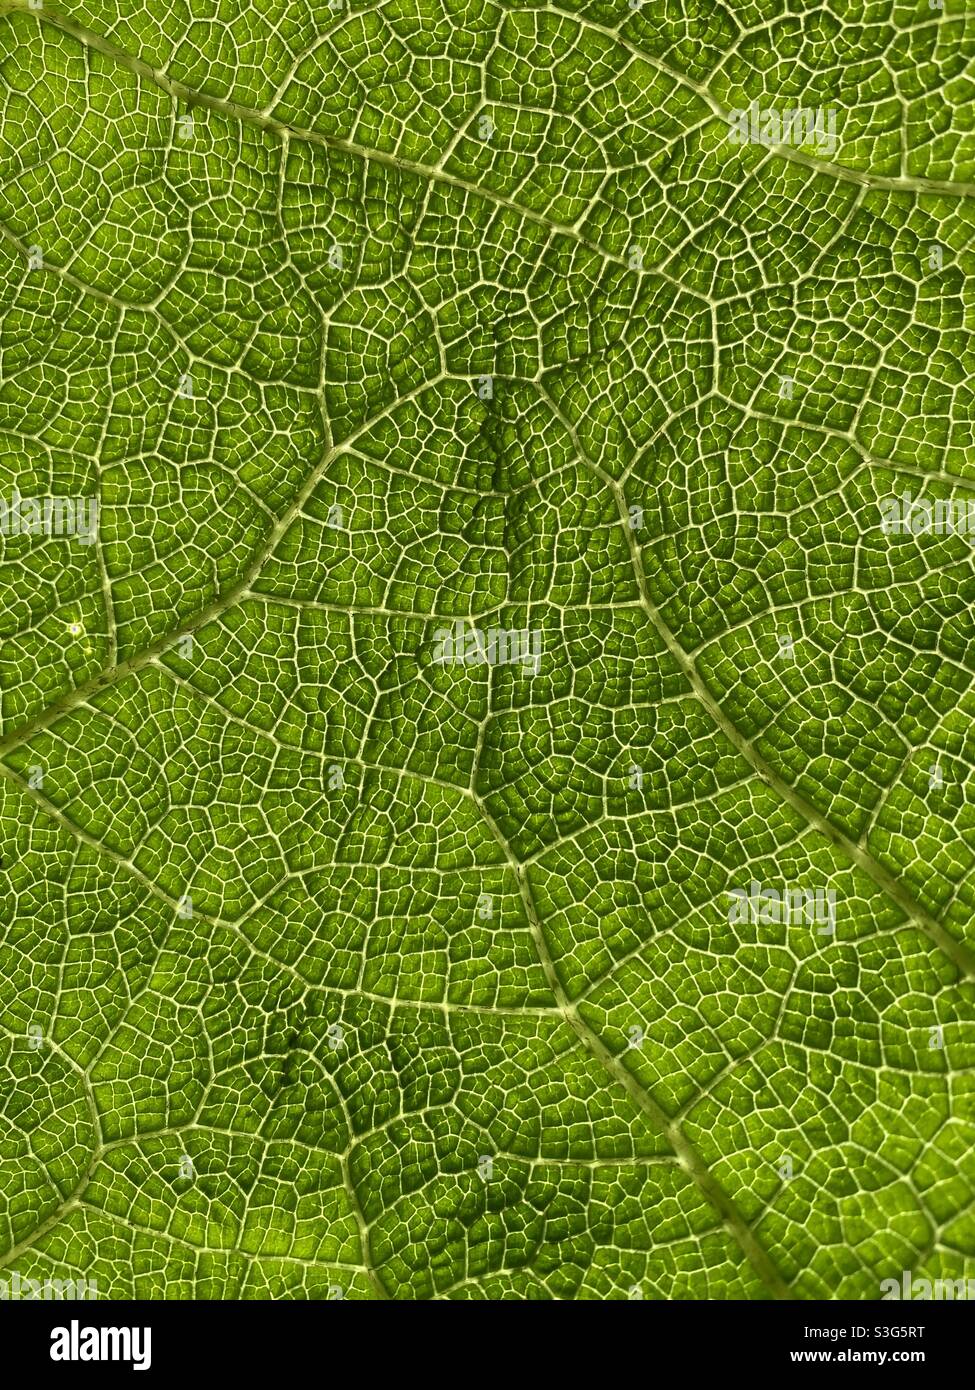 Network of veins in a sunlit leaf look like streets and buildings in a city Stock Photo